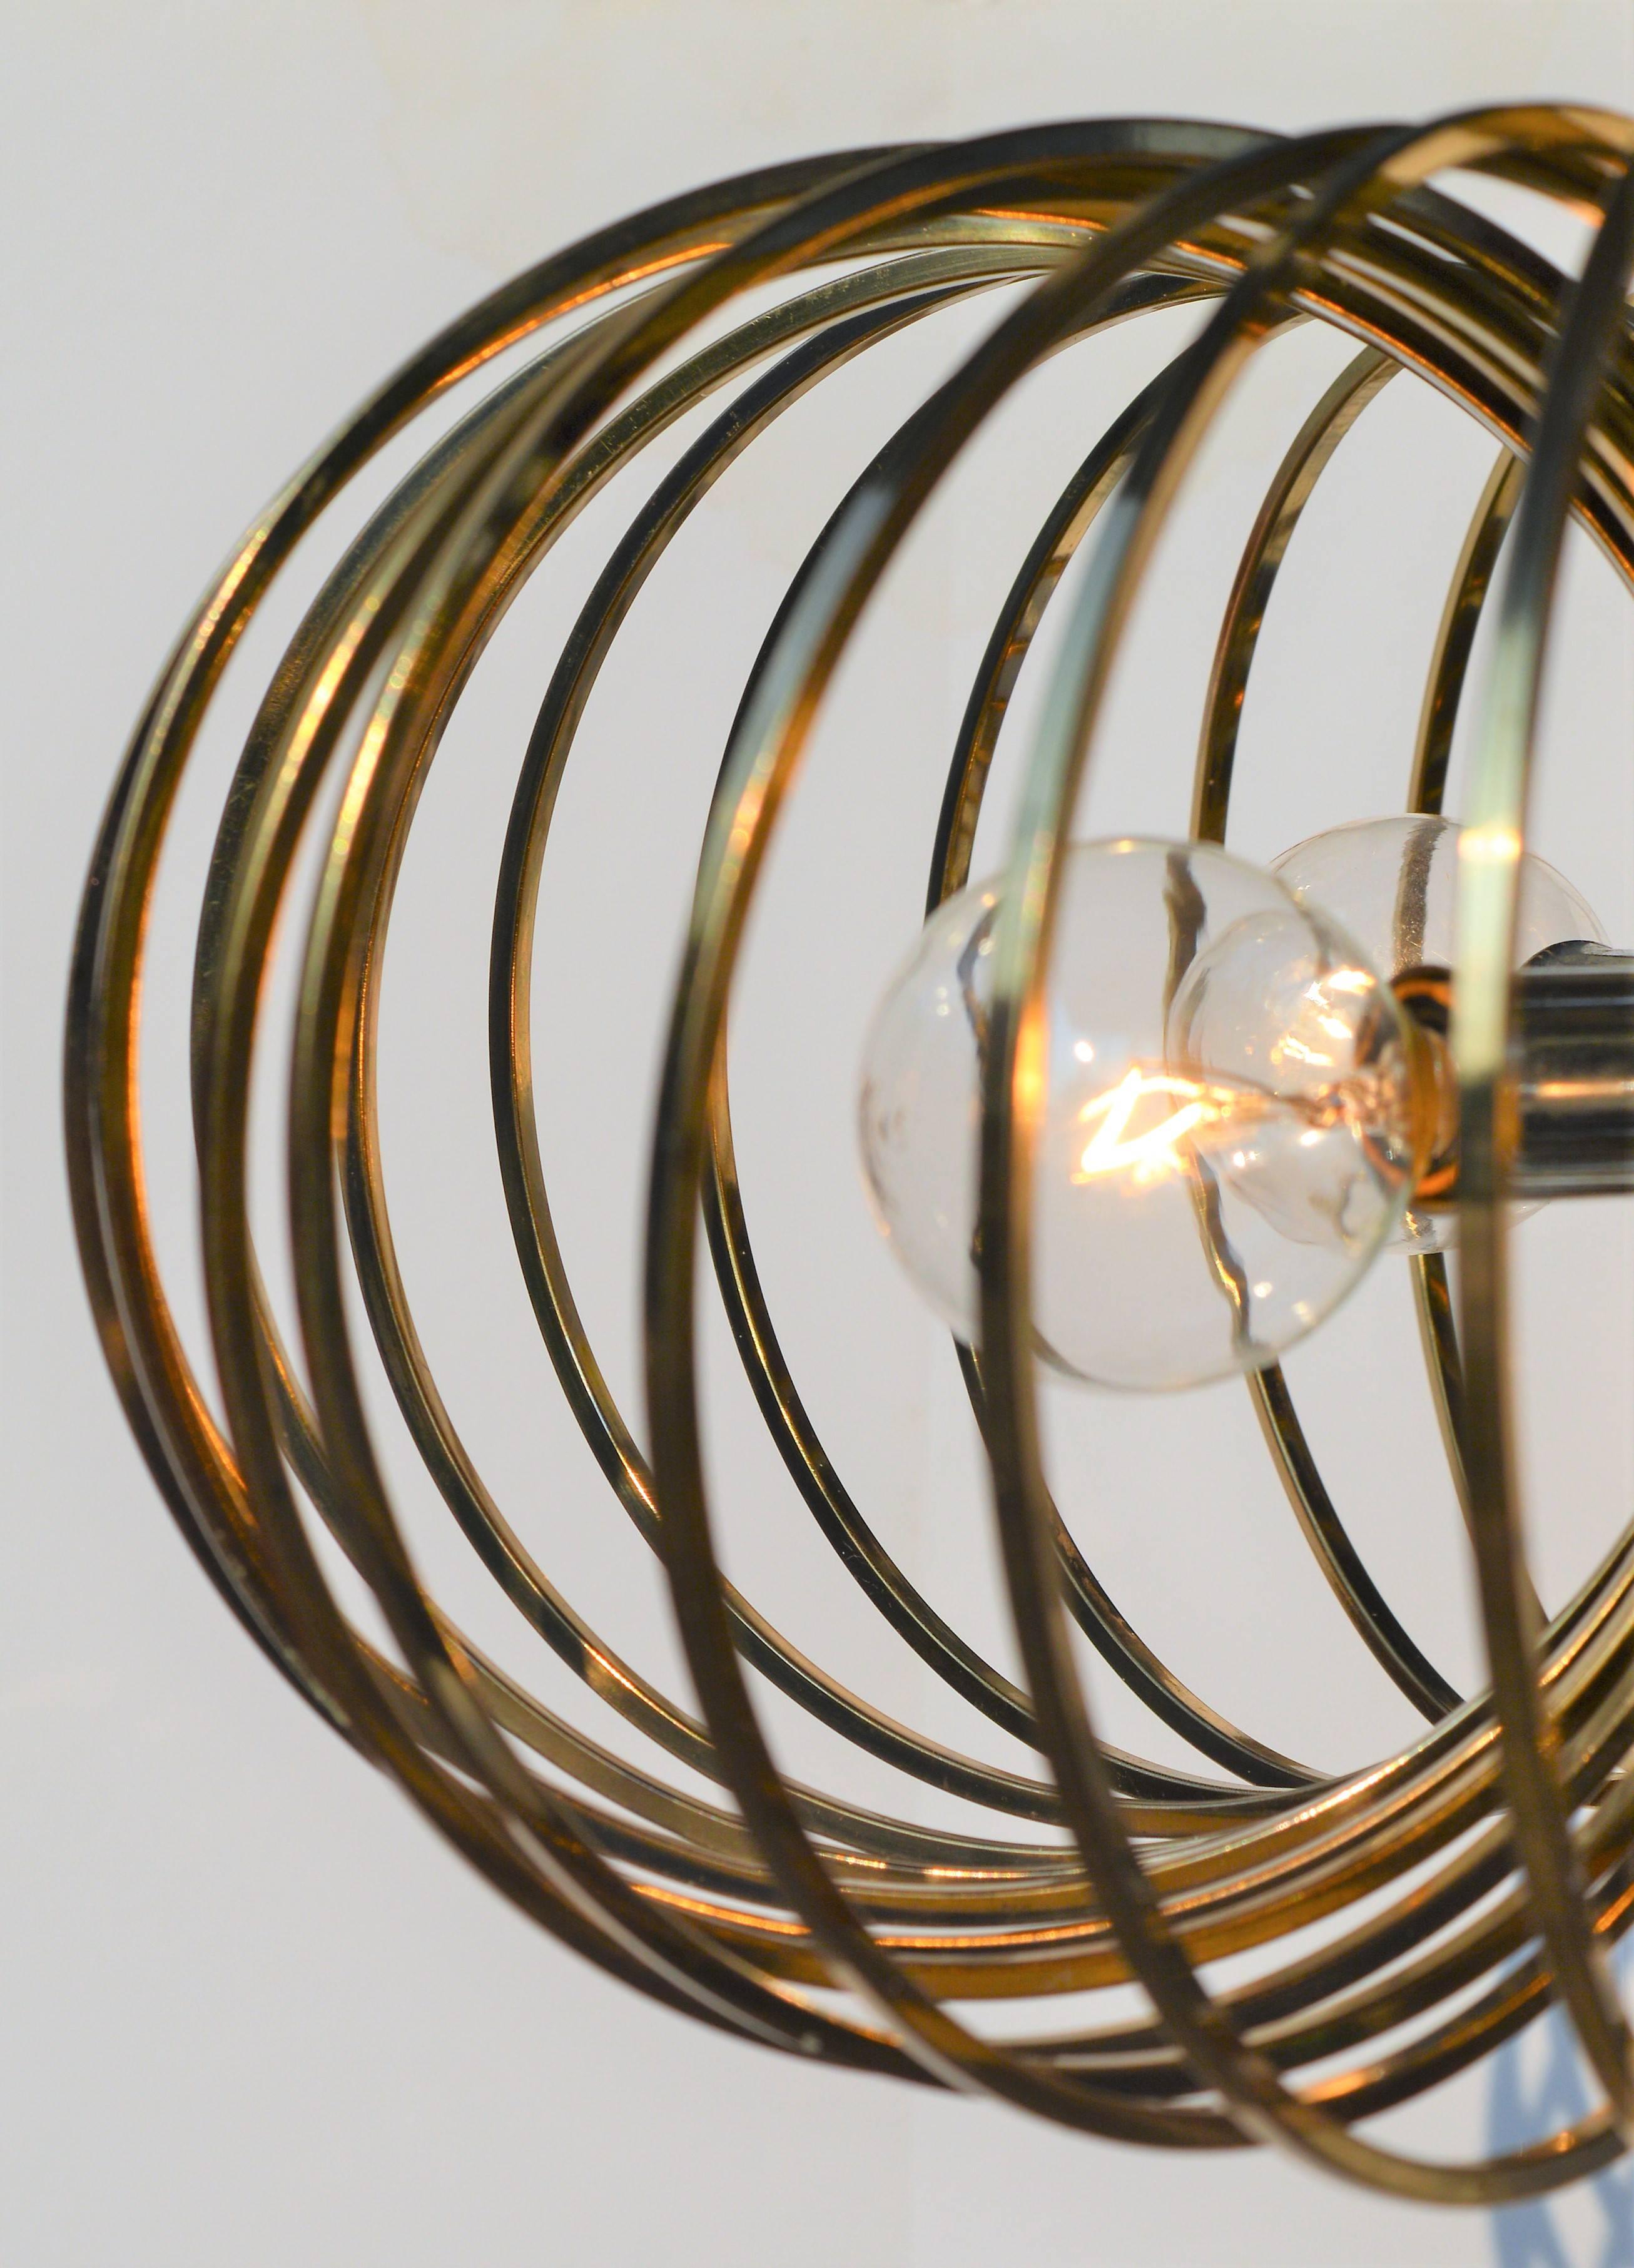 This striking pendant light or chandelier was designed in the 1960s by Sciolari for Lightolier and is playfully reminiscent of the Slinky toy of our childhoods. Featuring brass rings that encircle a central chrome band with four lights. The brass is